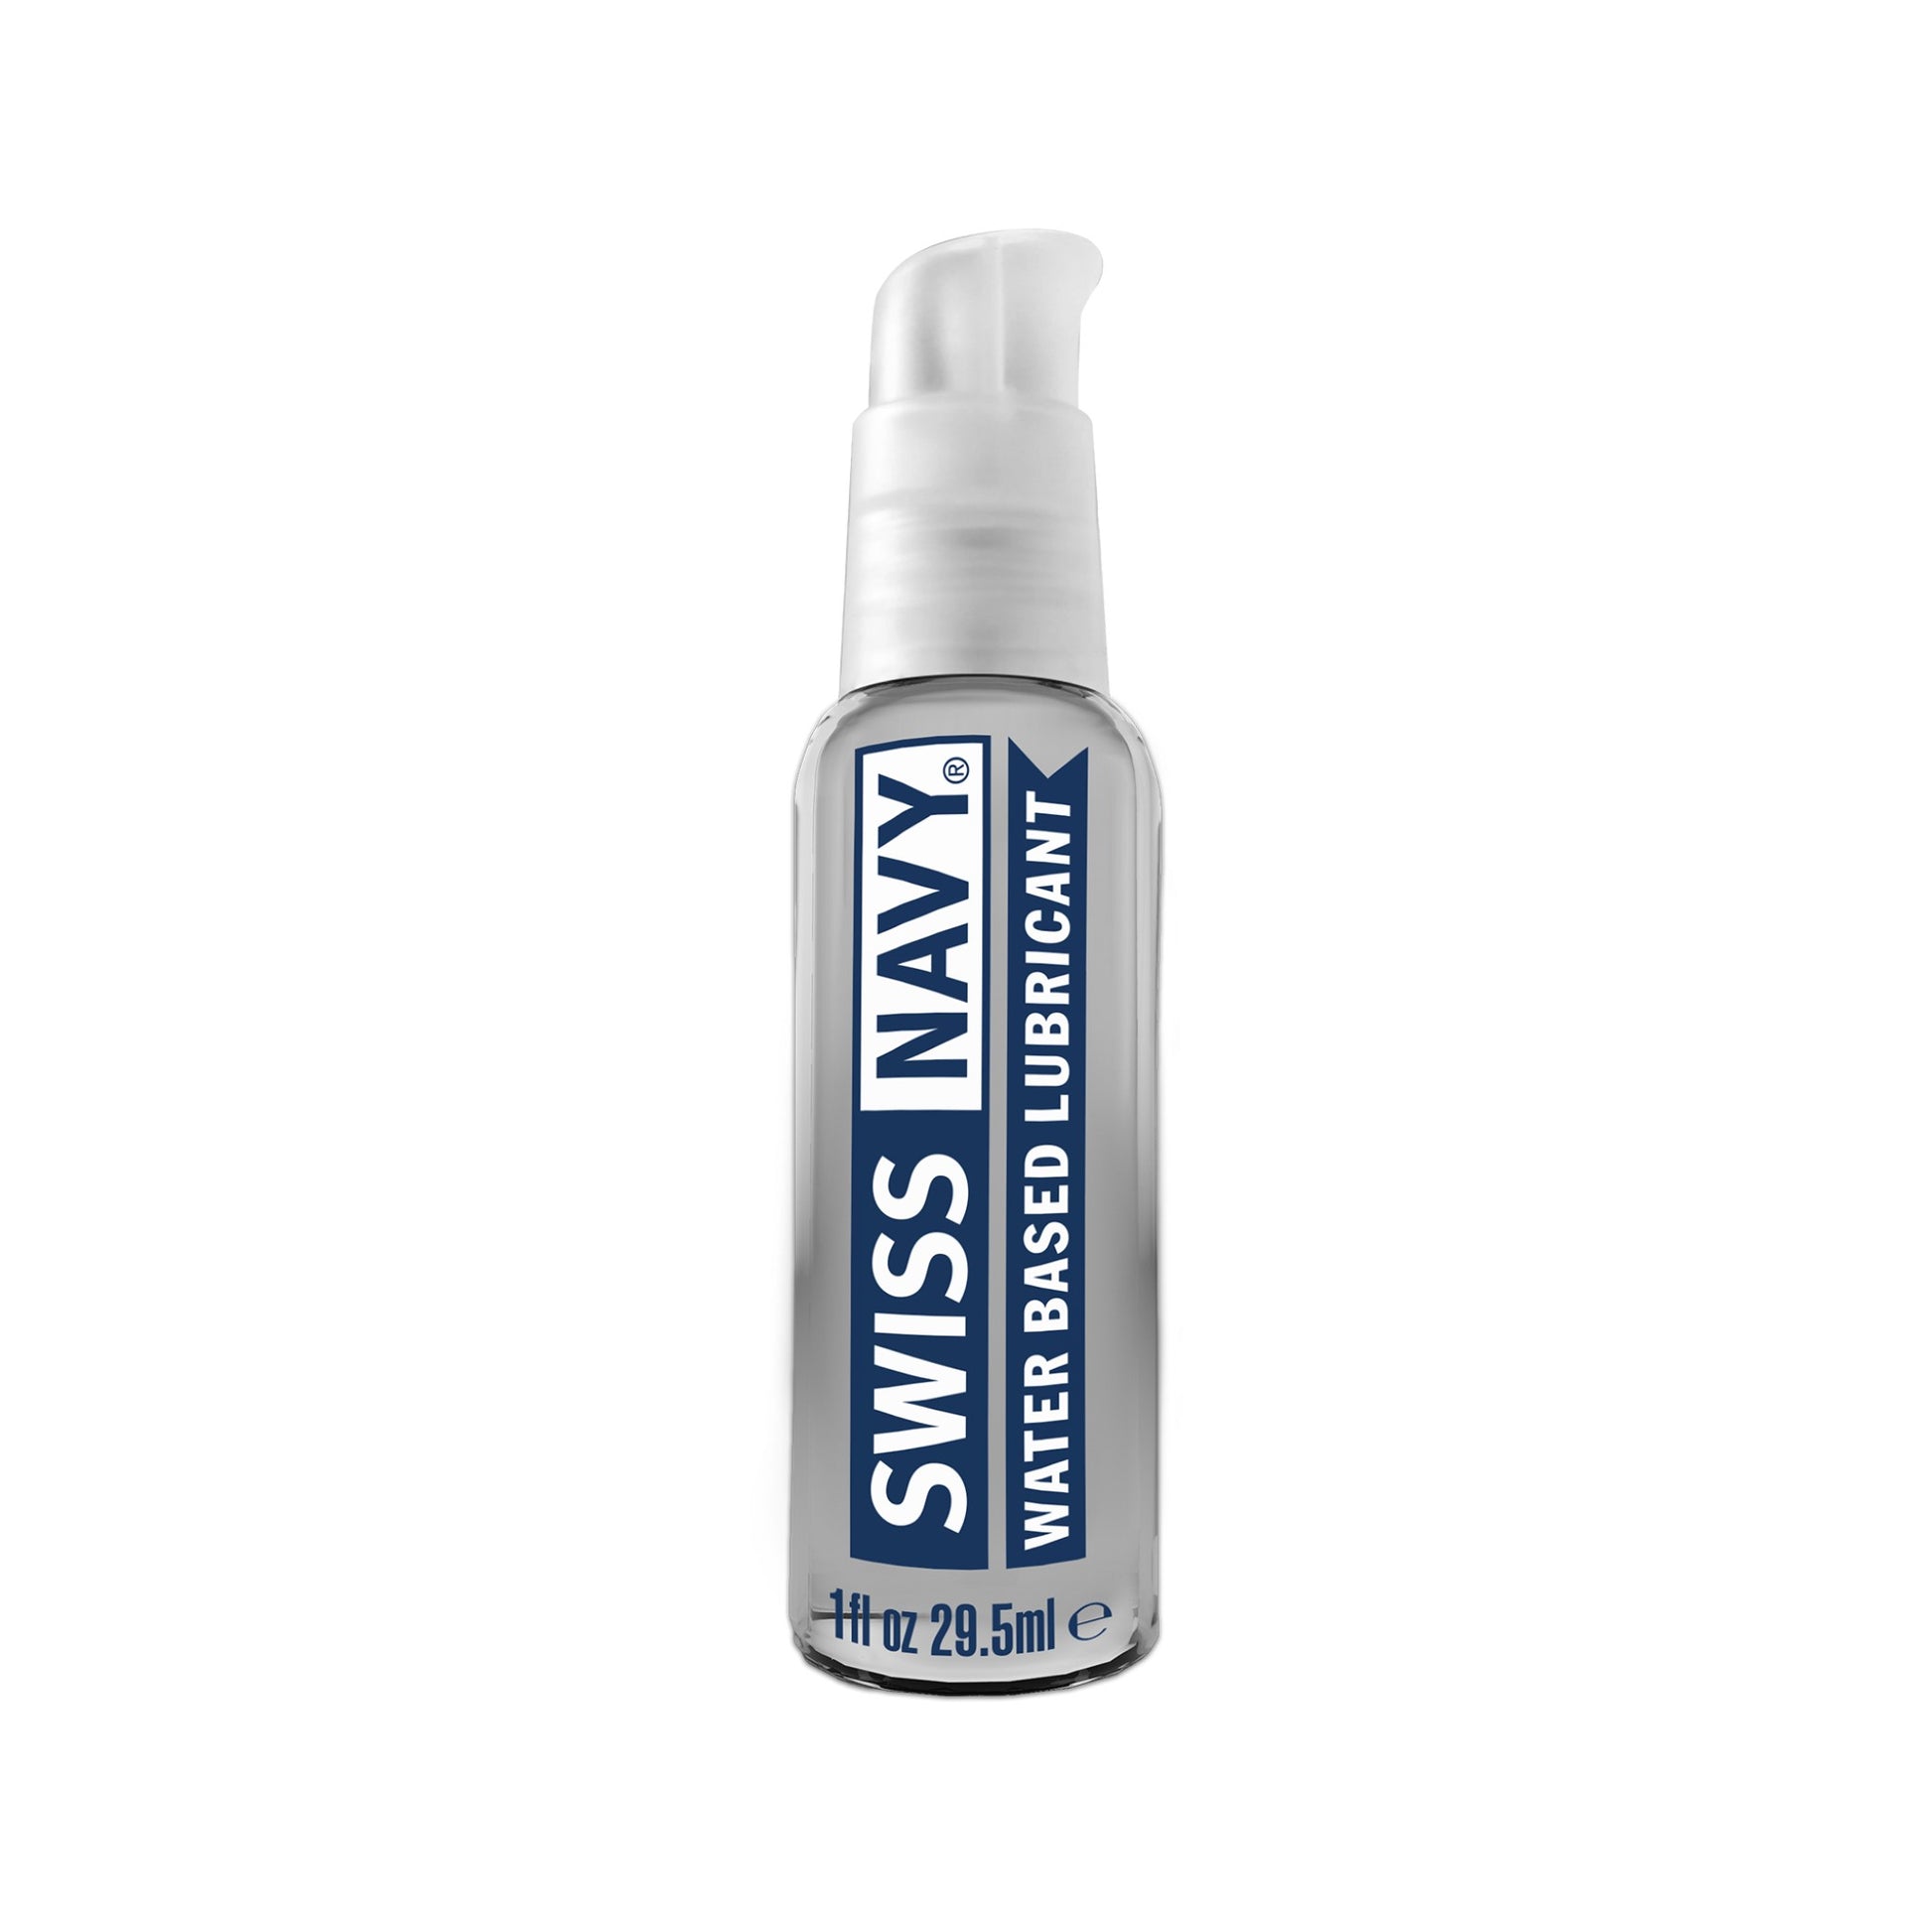 swiss-navy-water-based-lubricant